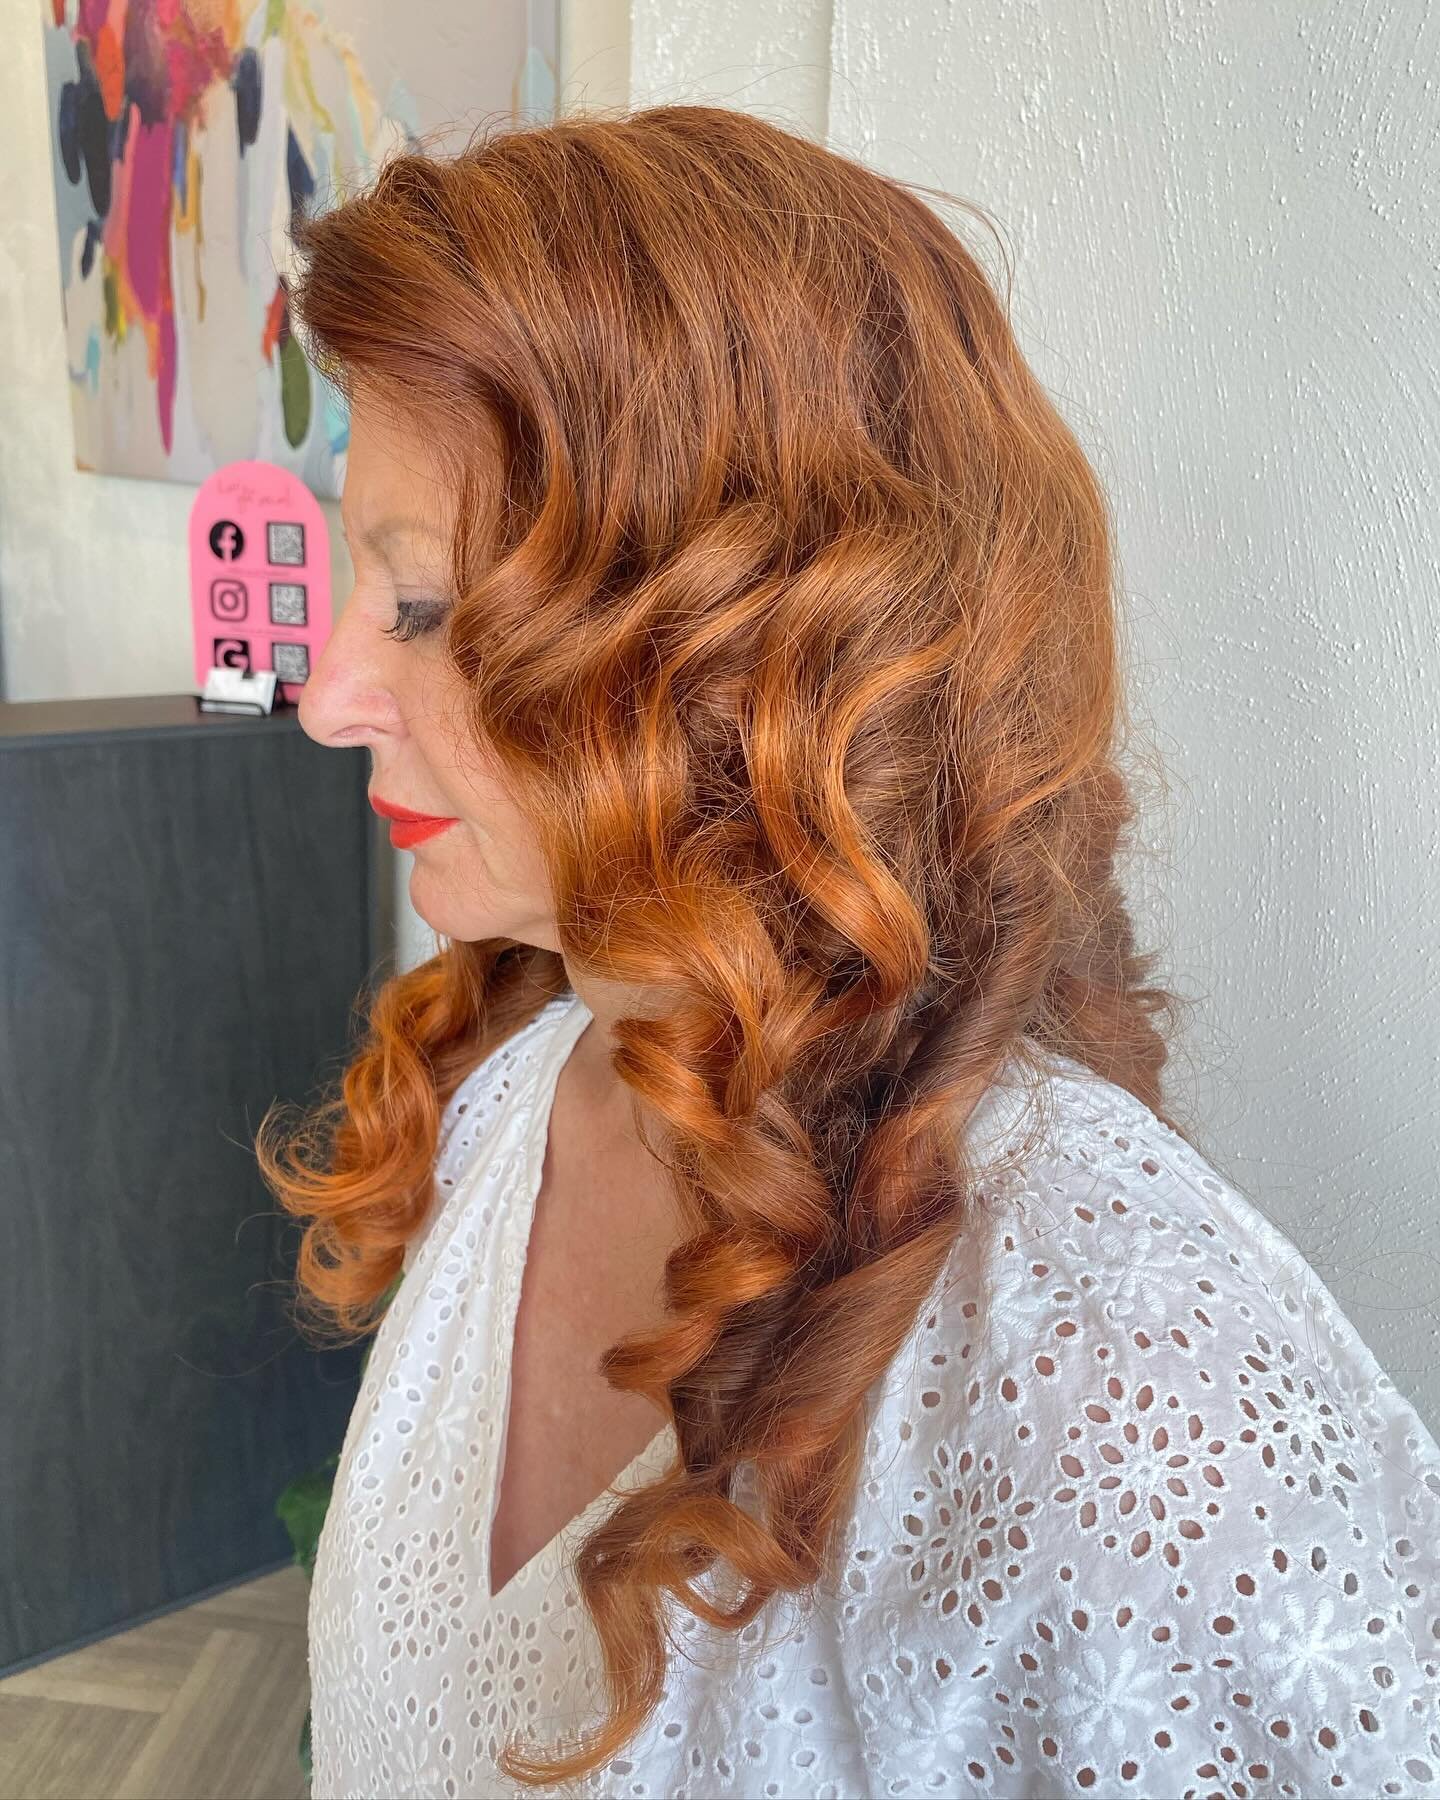 When your client wants a little bit vintage, a little bit glam, a little bit rock n roll&hellip;&hellip; BUT needs it to hold ALL NIGHT🔥🔥🔥

Thanks Bee for this beautiful ROLLER SET&hellip; the perfect technique for long lasting curls and body💃🏻